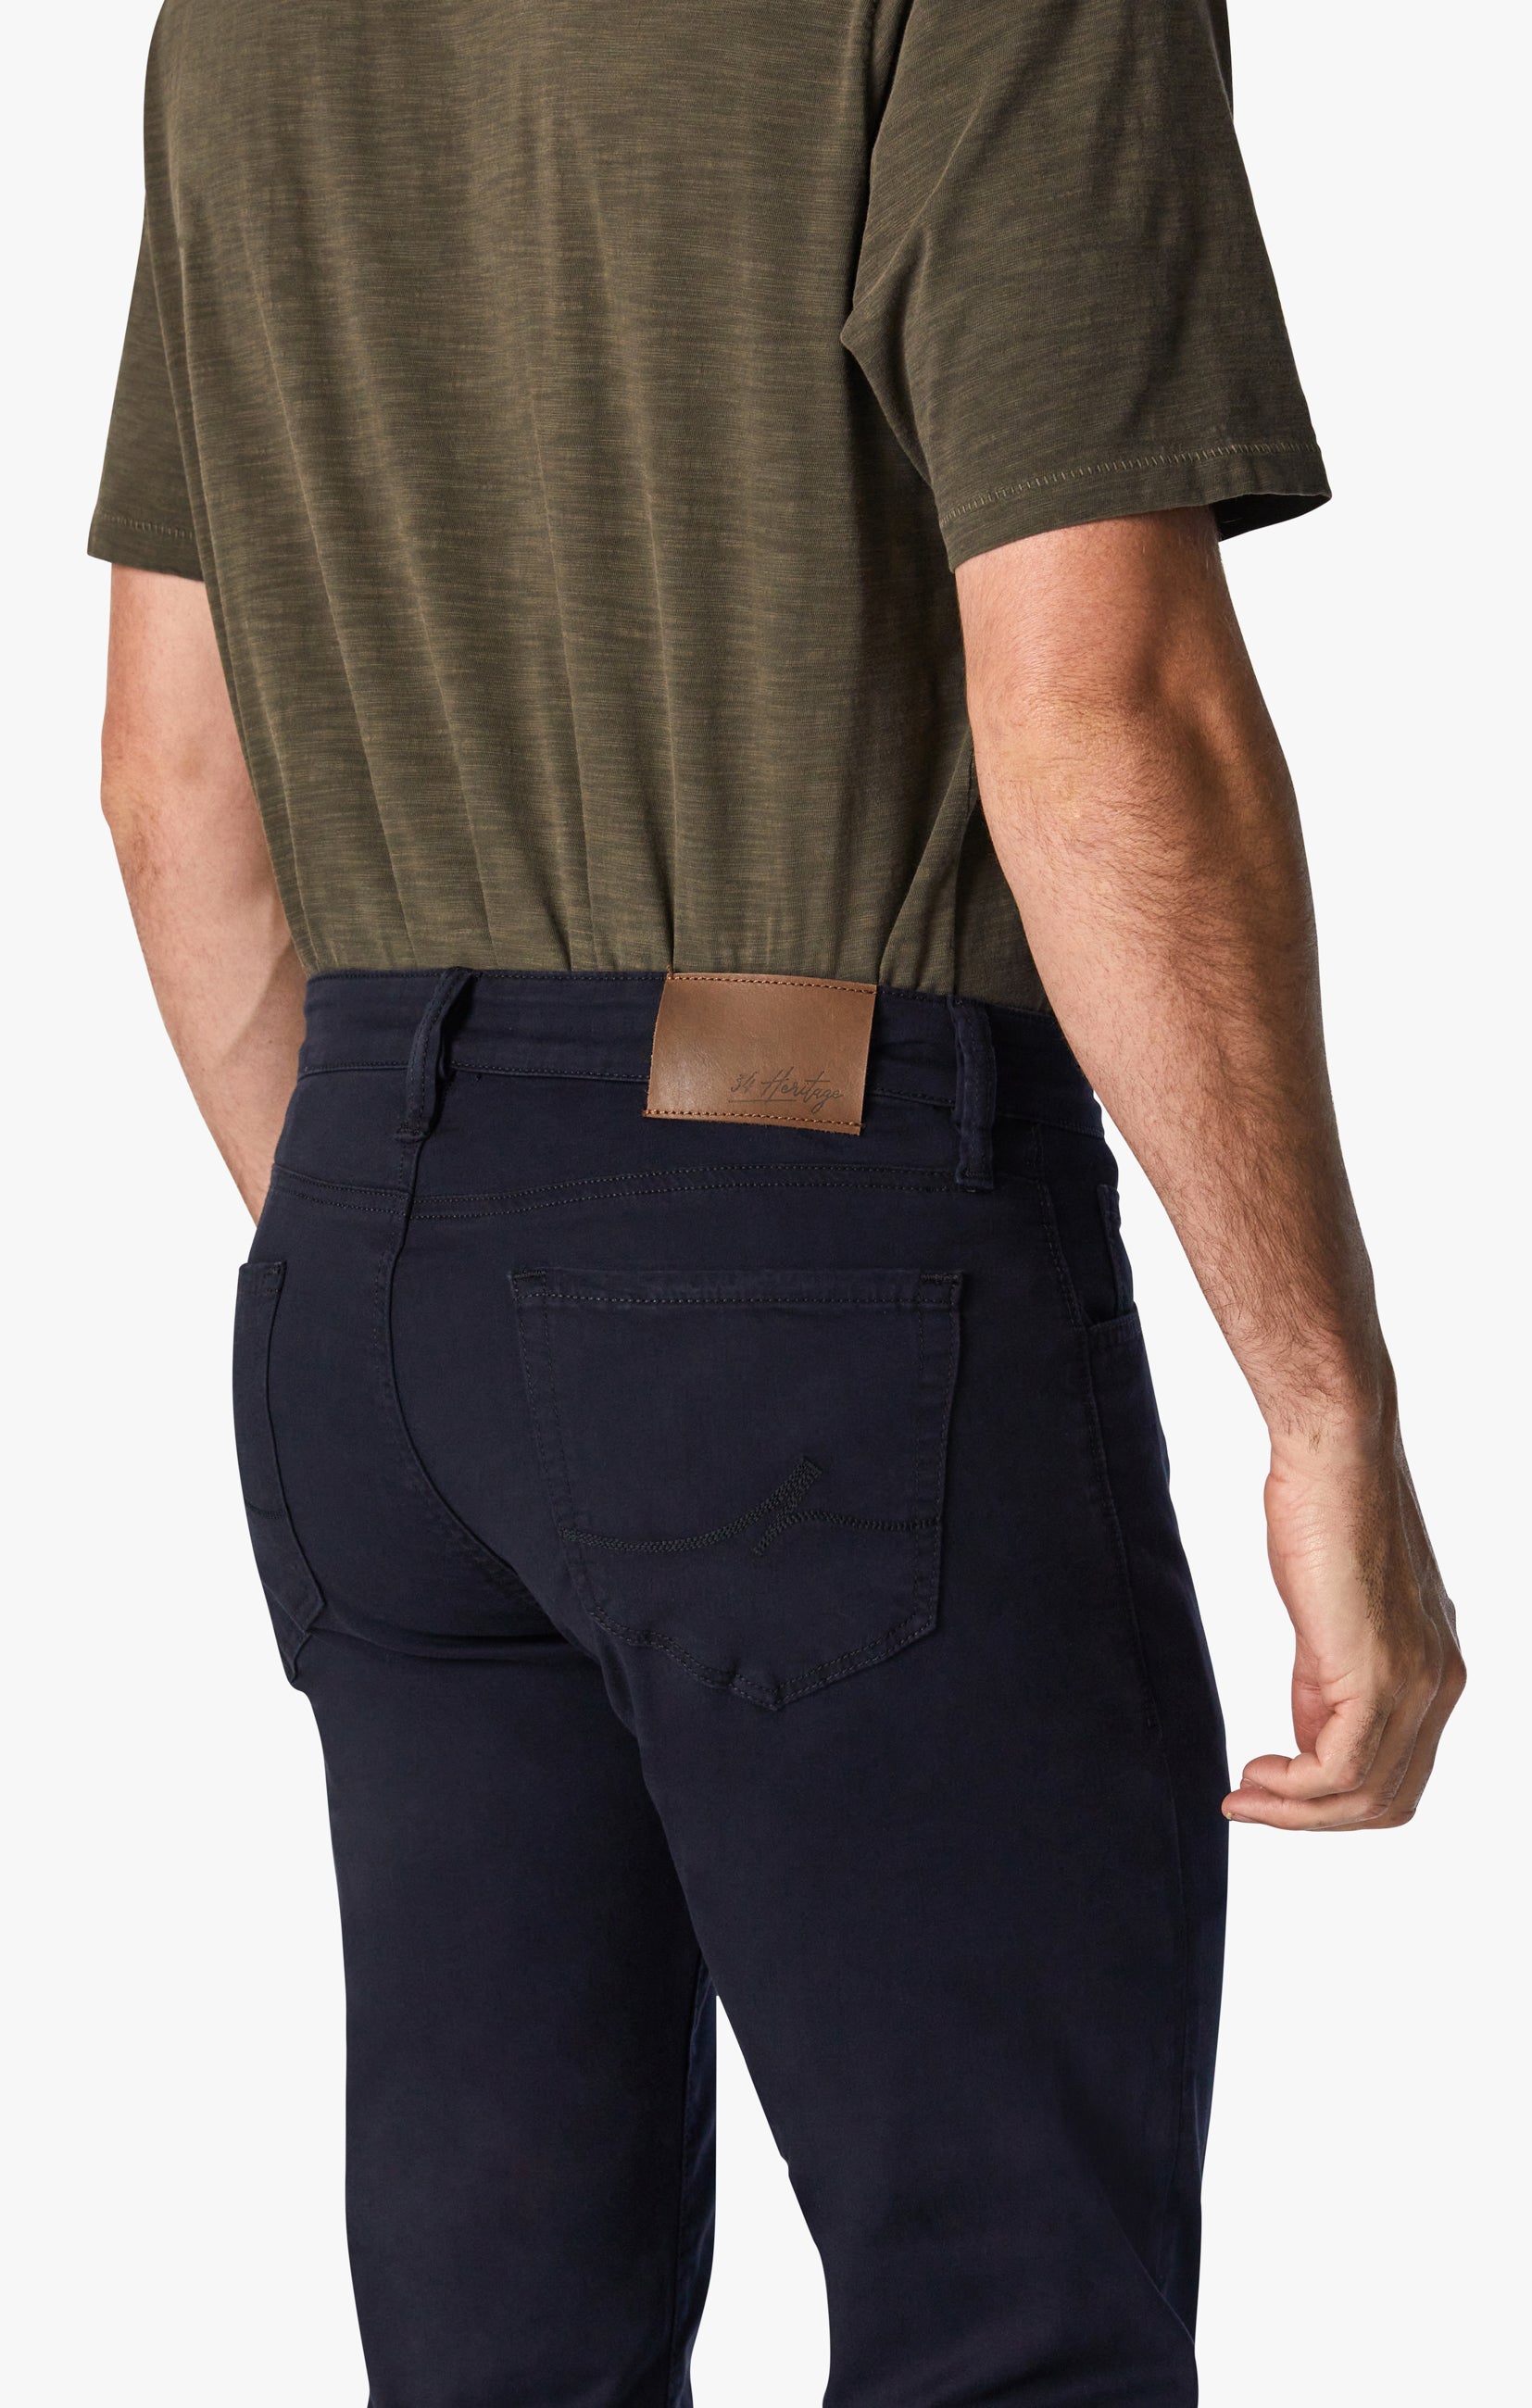 Courage Straight Leg Pants in Navy Twill Image 2